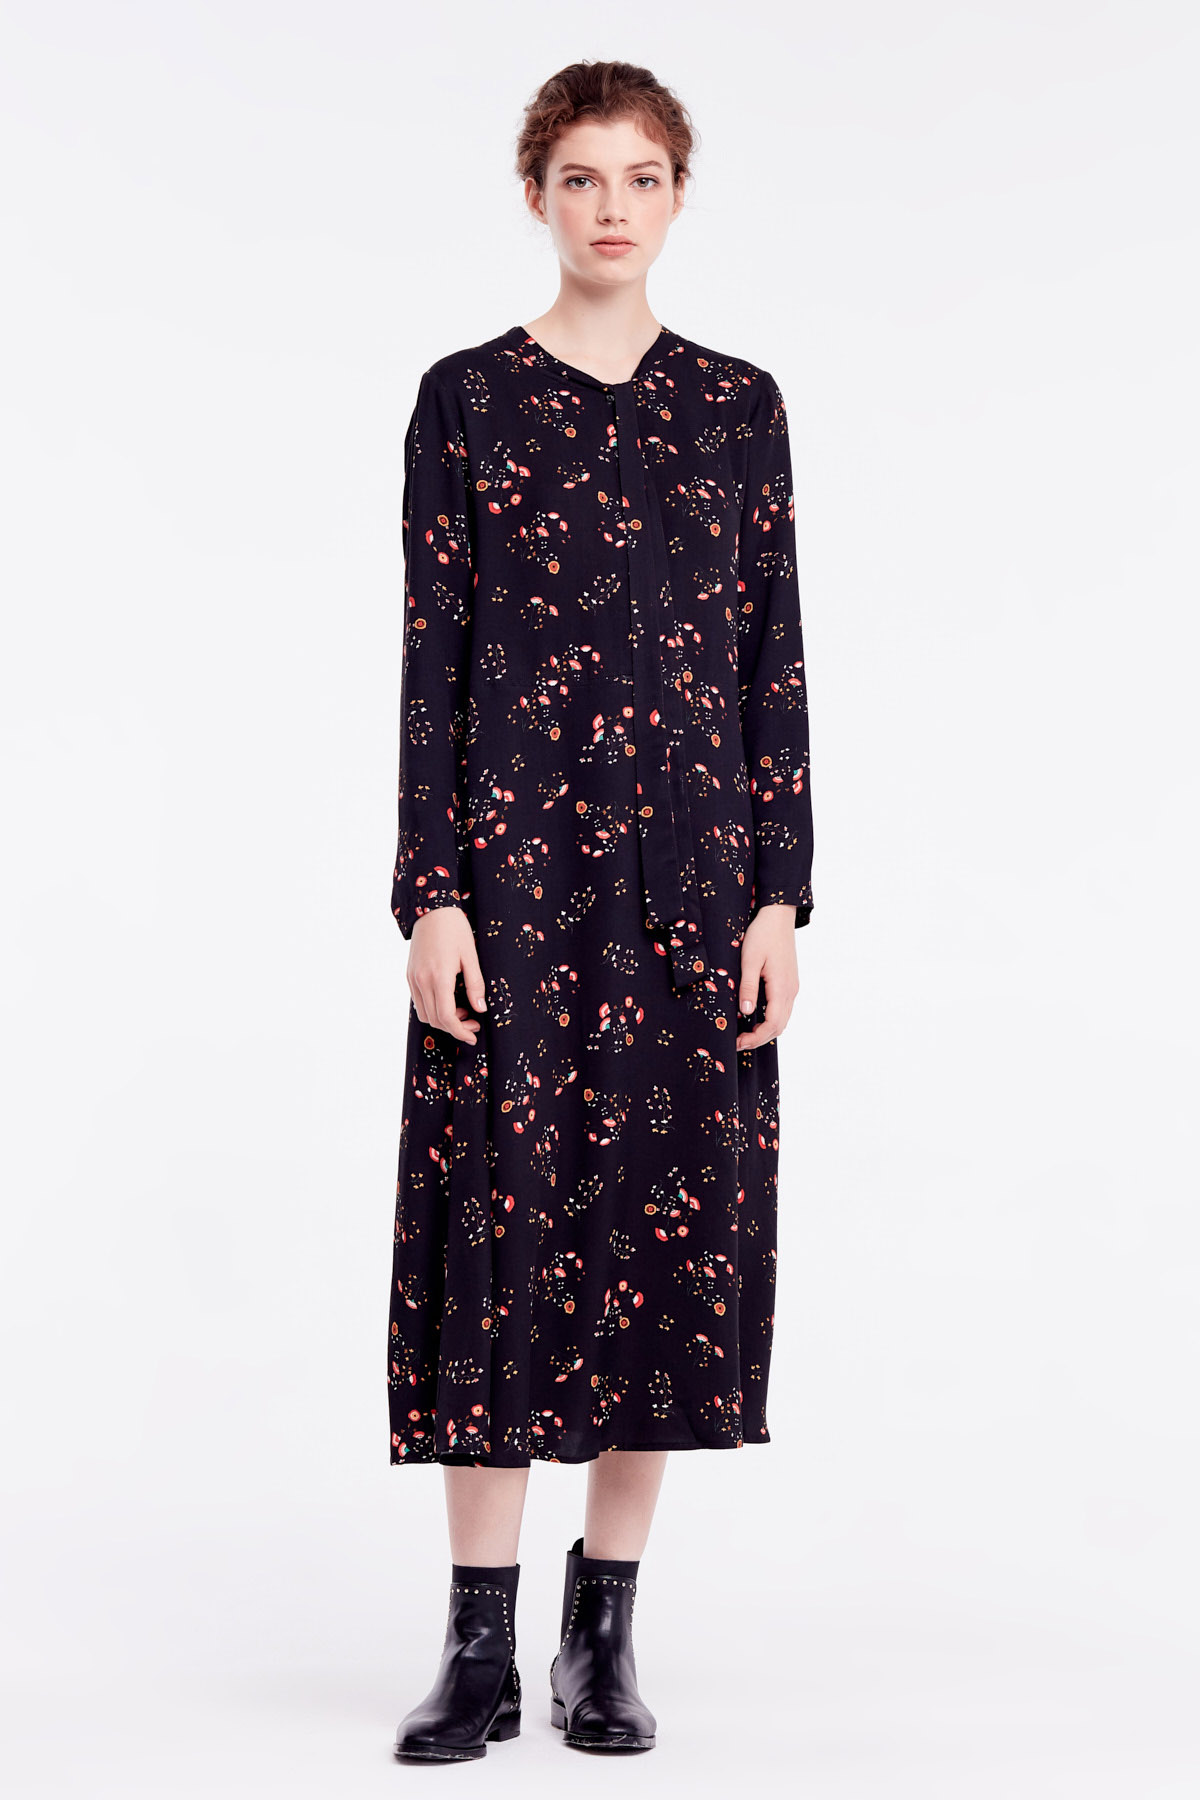 Midi black floral dress with a bow , photo 4